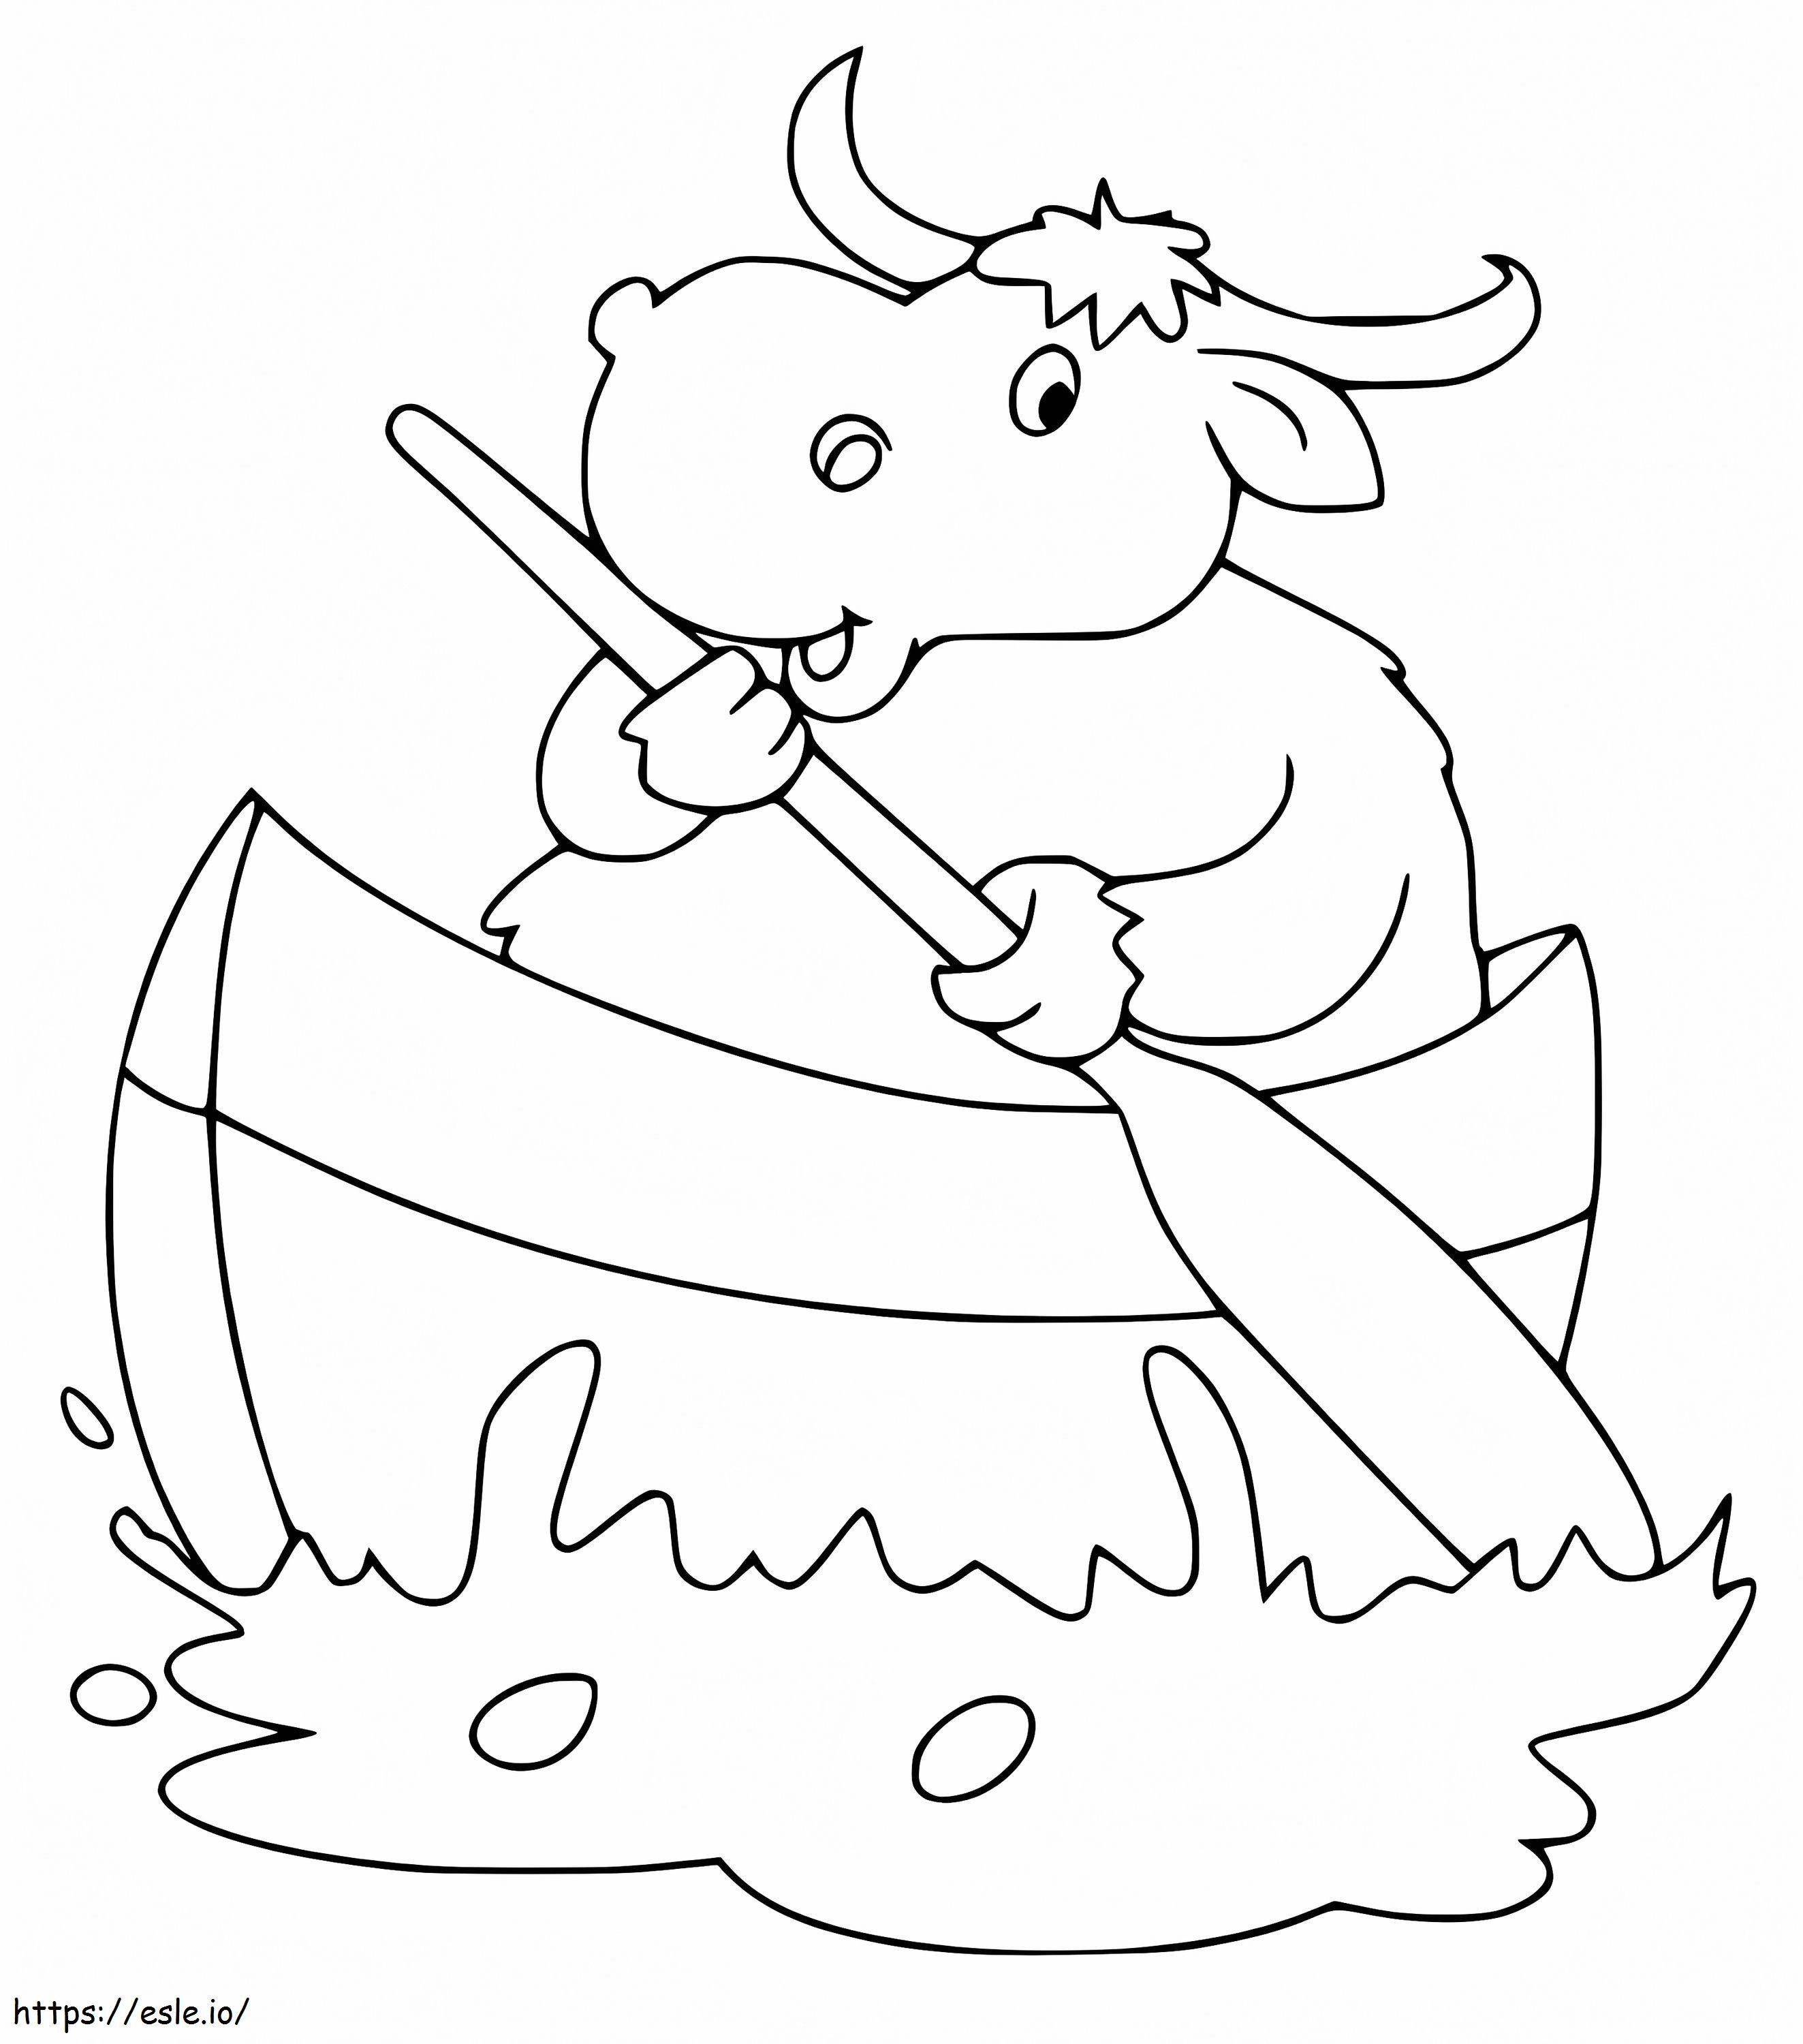 Yak On Boat coloring page